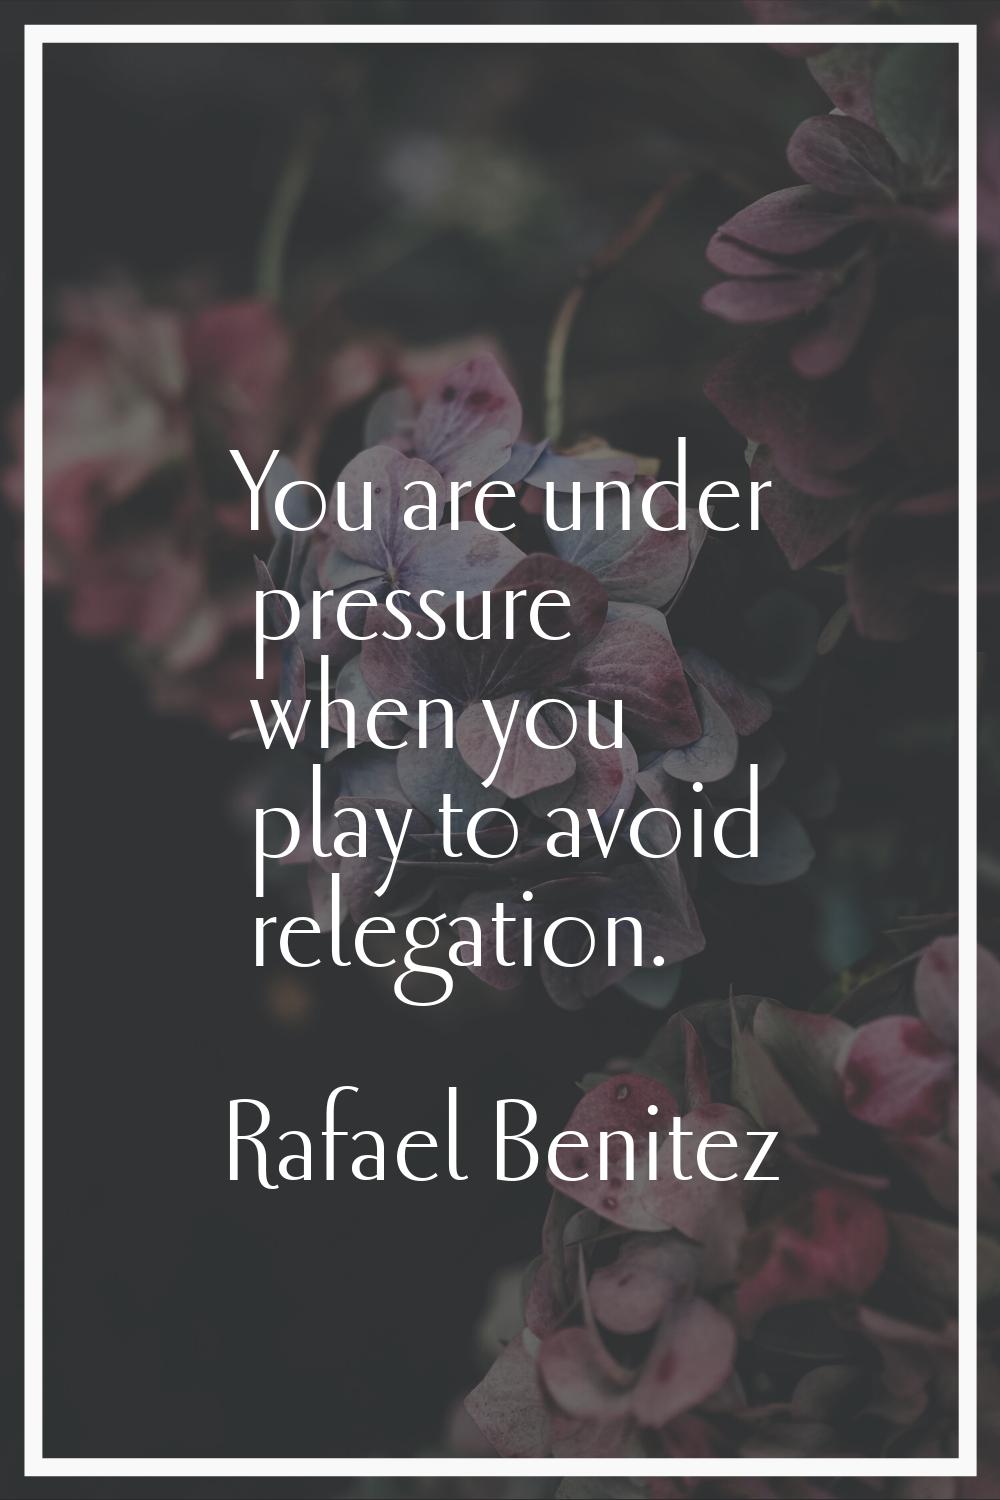 You are under pressure when you play to avoid relegation.